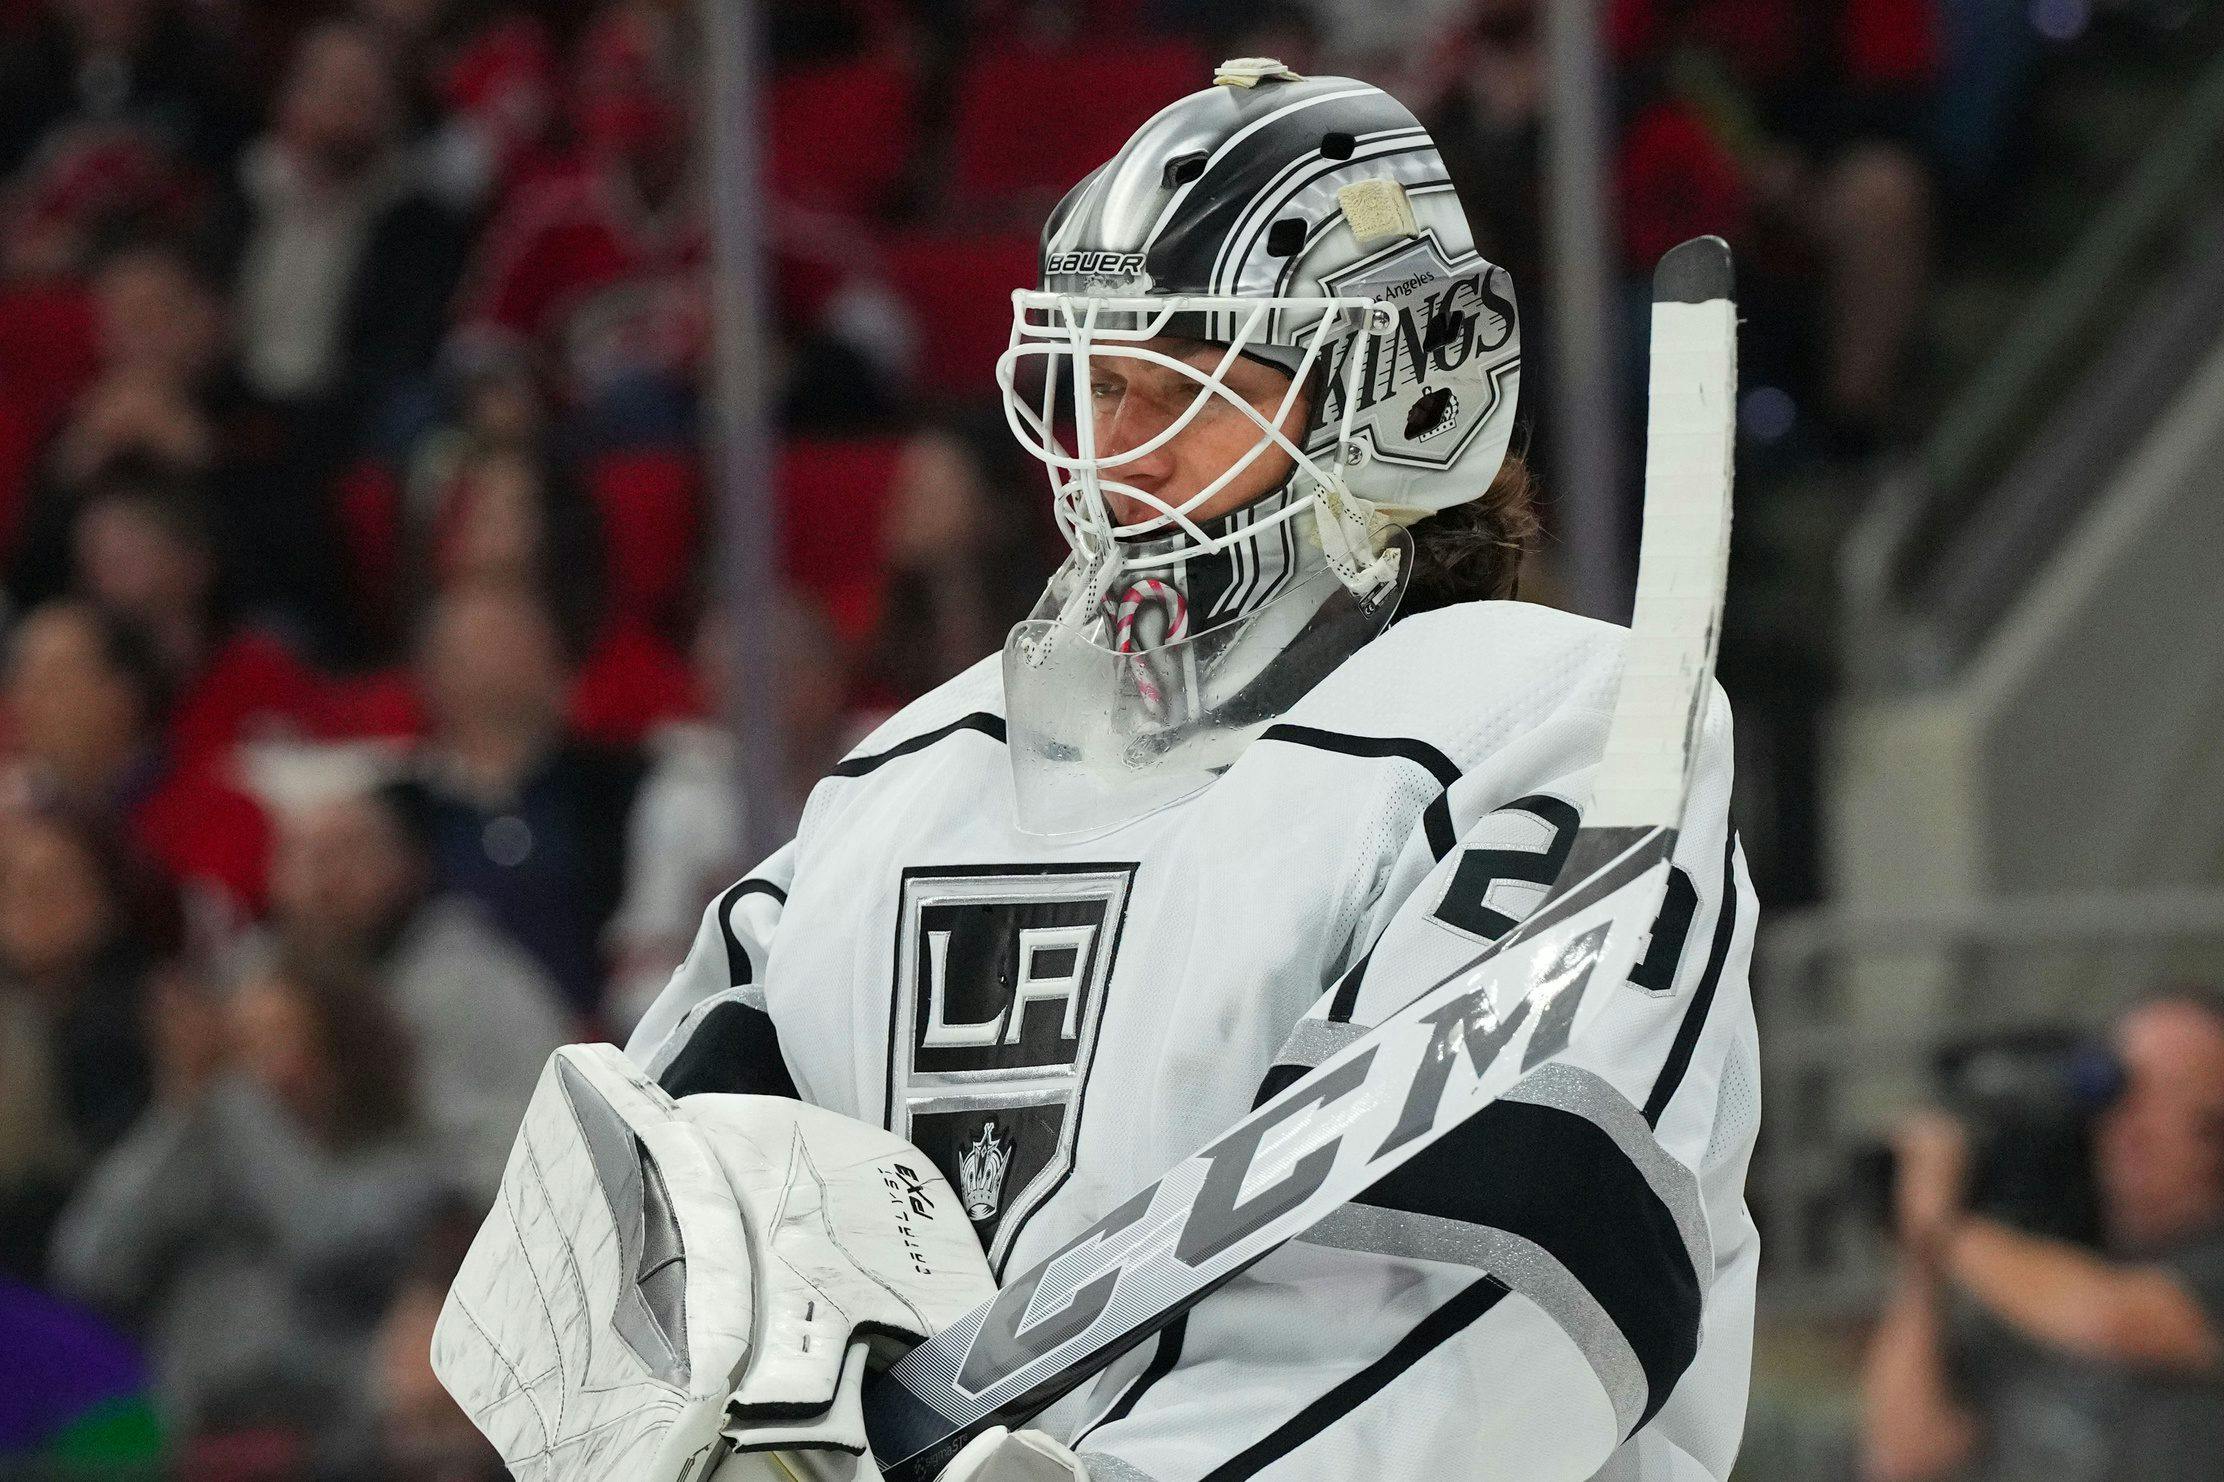 Los Angeles Kings sign Pheonix Copley, Trevor Lewis to one-year contracts